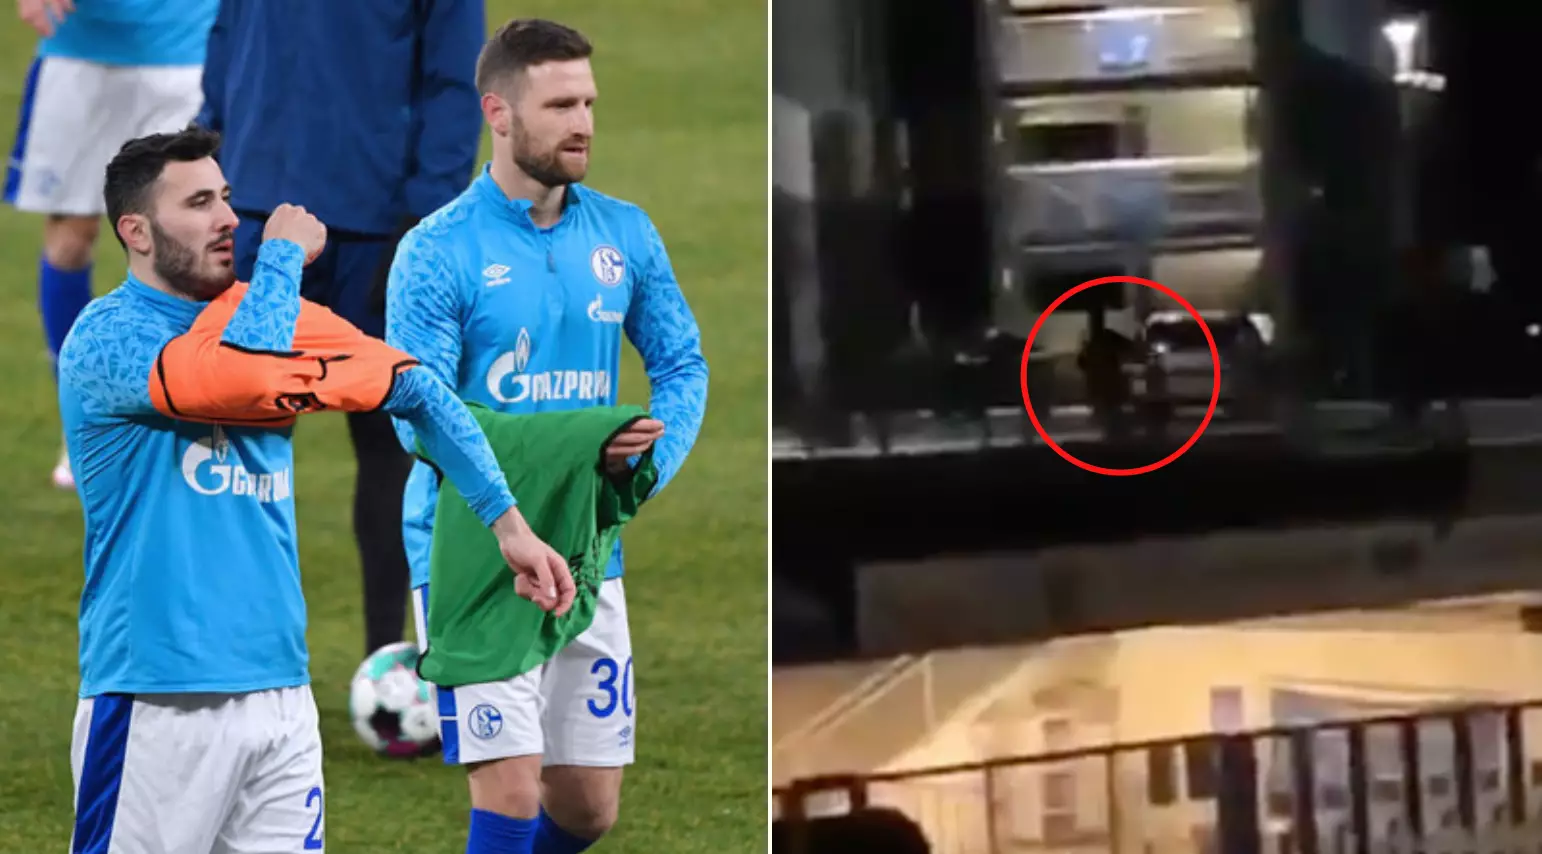 Schalke Players Attacked By Their Own Fans In Terrifying Scenes After Relegation